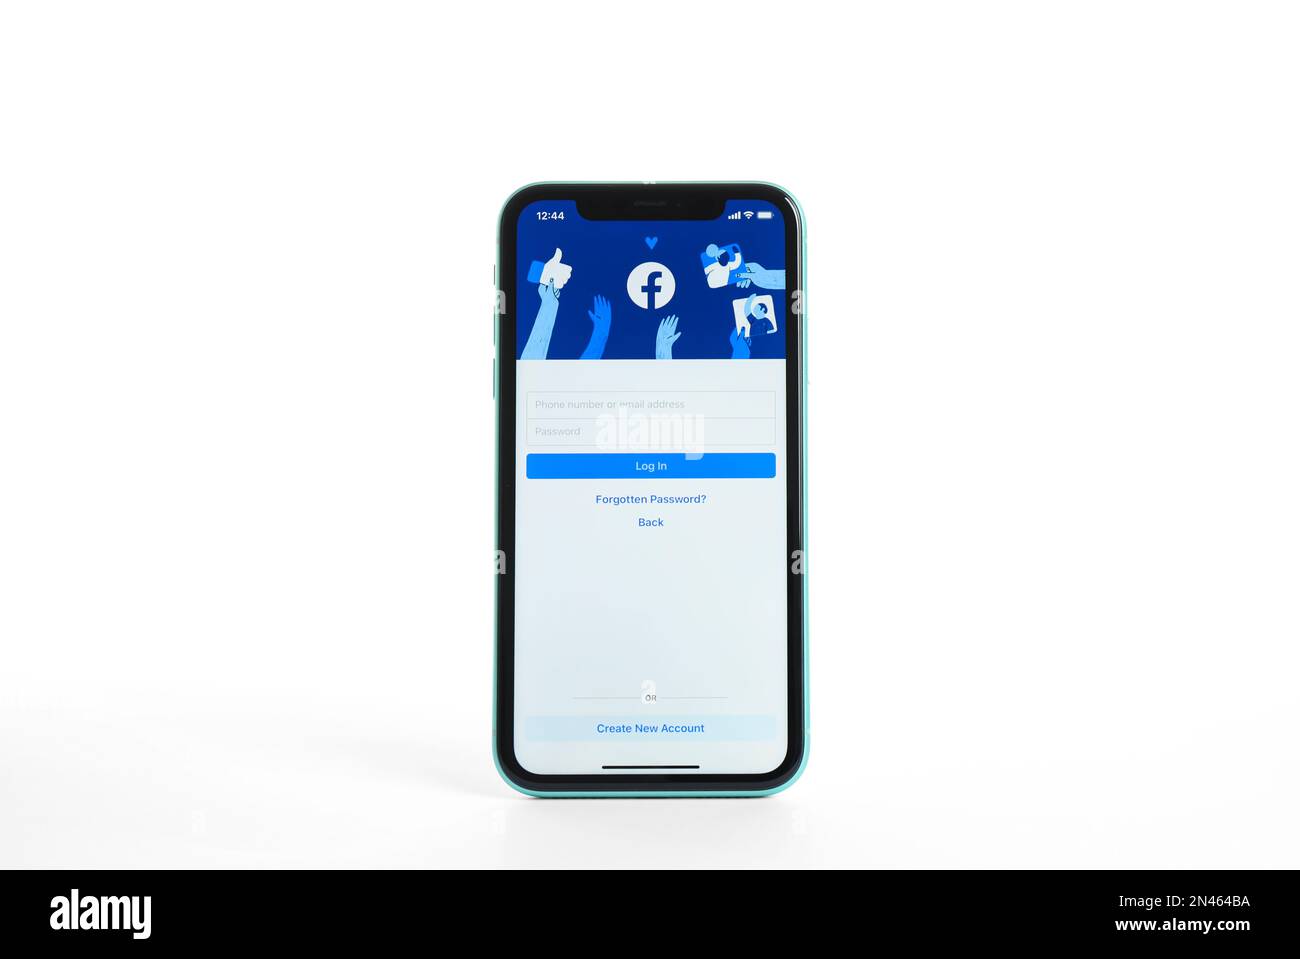 MYKOLAIV, UKRAINE - JULY 9, 2020: iPhone 11 with Facebook app on screen against white background Stock Photo